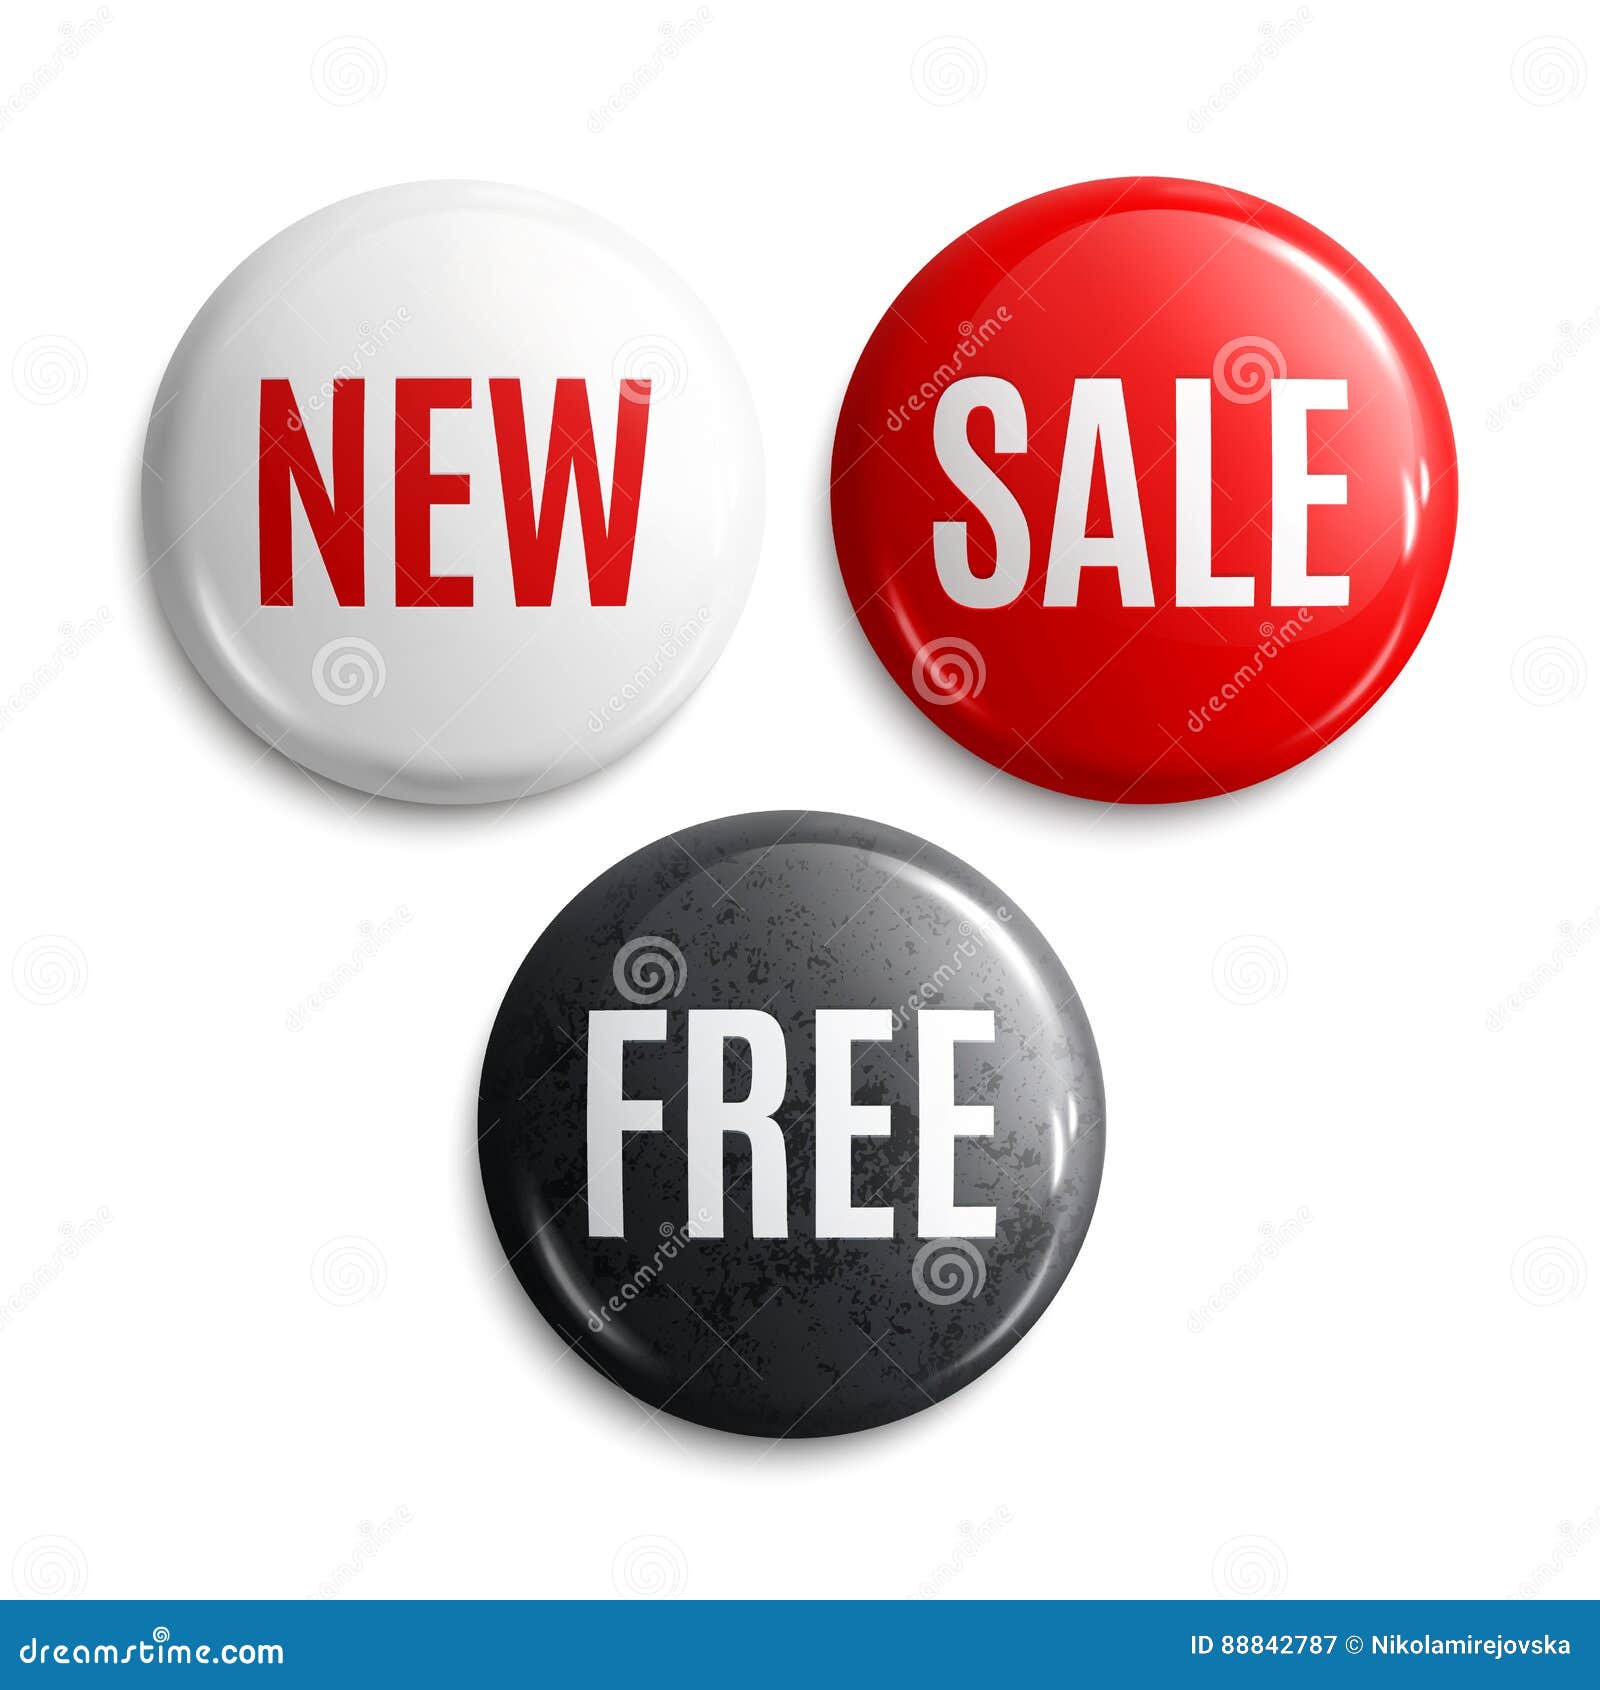 New Free Sale On Glossy Buttons Or Badges Product Promotions